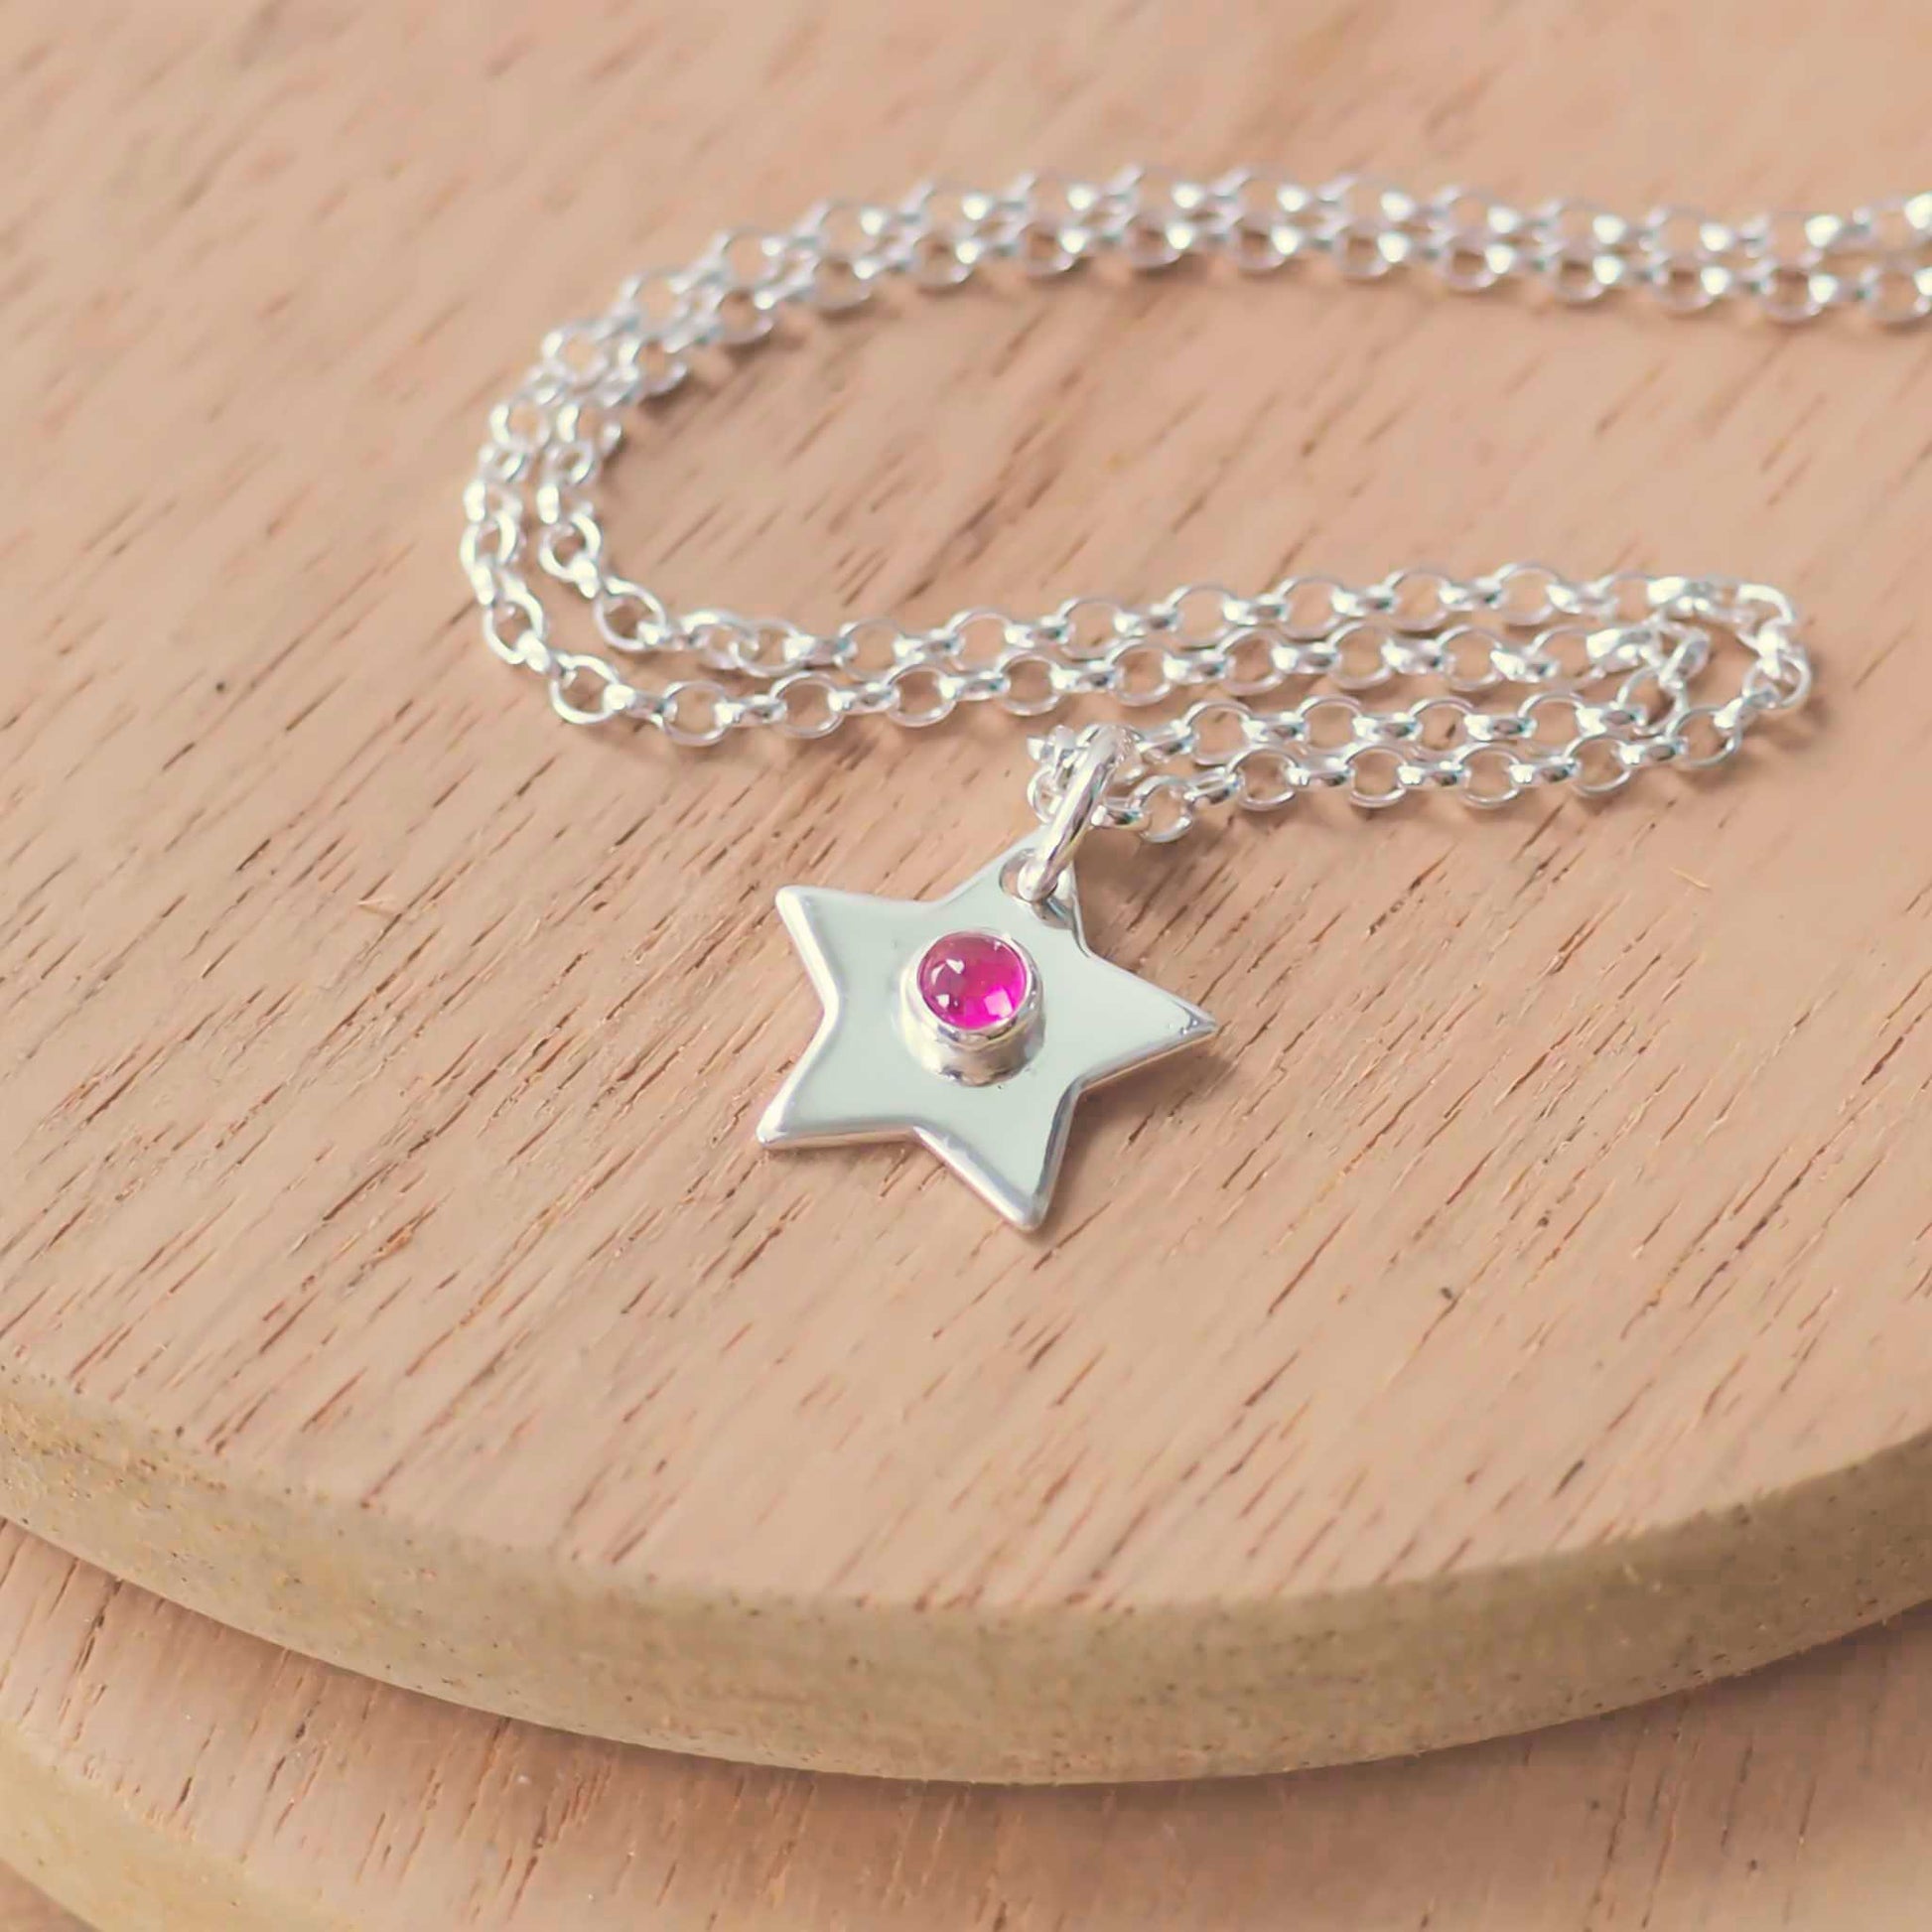 July Birthstone Charm Necklace in the shape of a star with a round 3mm lab ruby cabochon centre. The star measures 12mm in size so is small enough for children as well as adults and is available in a range of other birthstones too. It is Sterling Silver and comes with a choice of chain design and length. Handmade in Scotland by Maram Jewellery